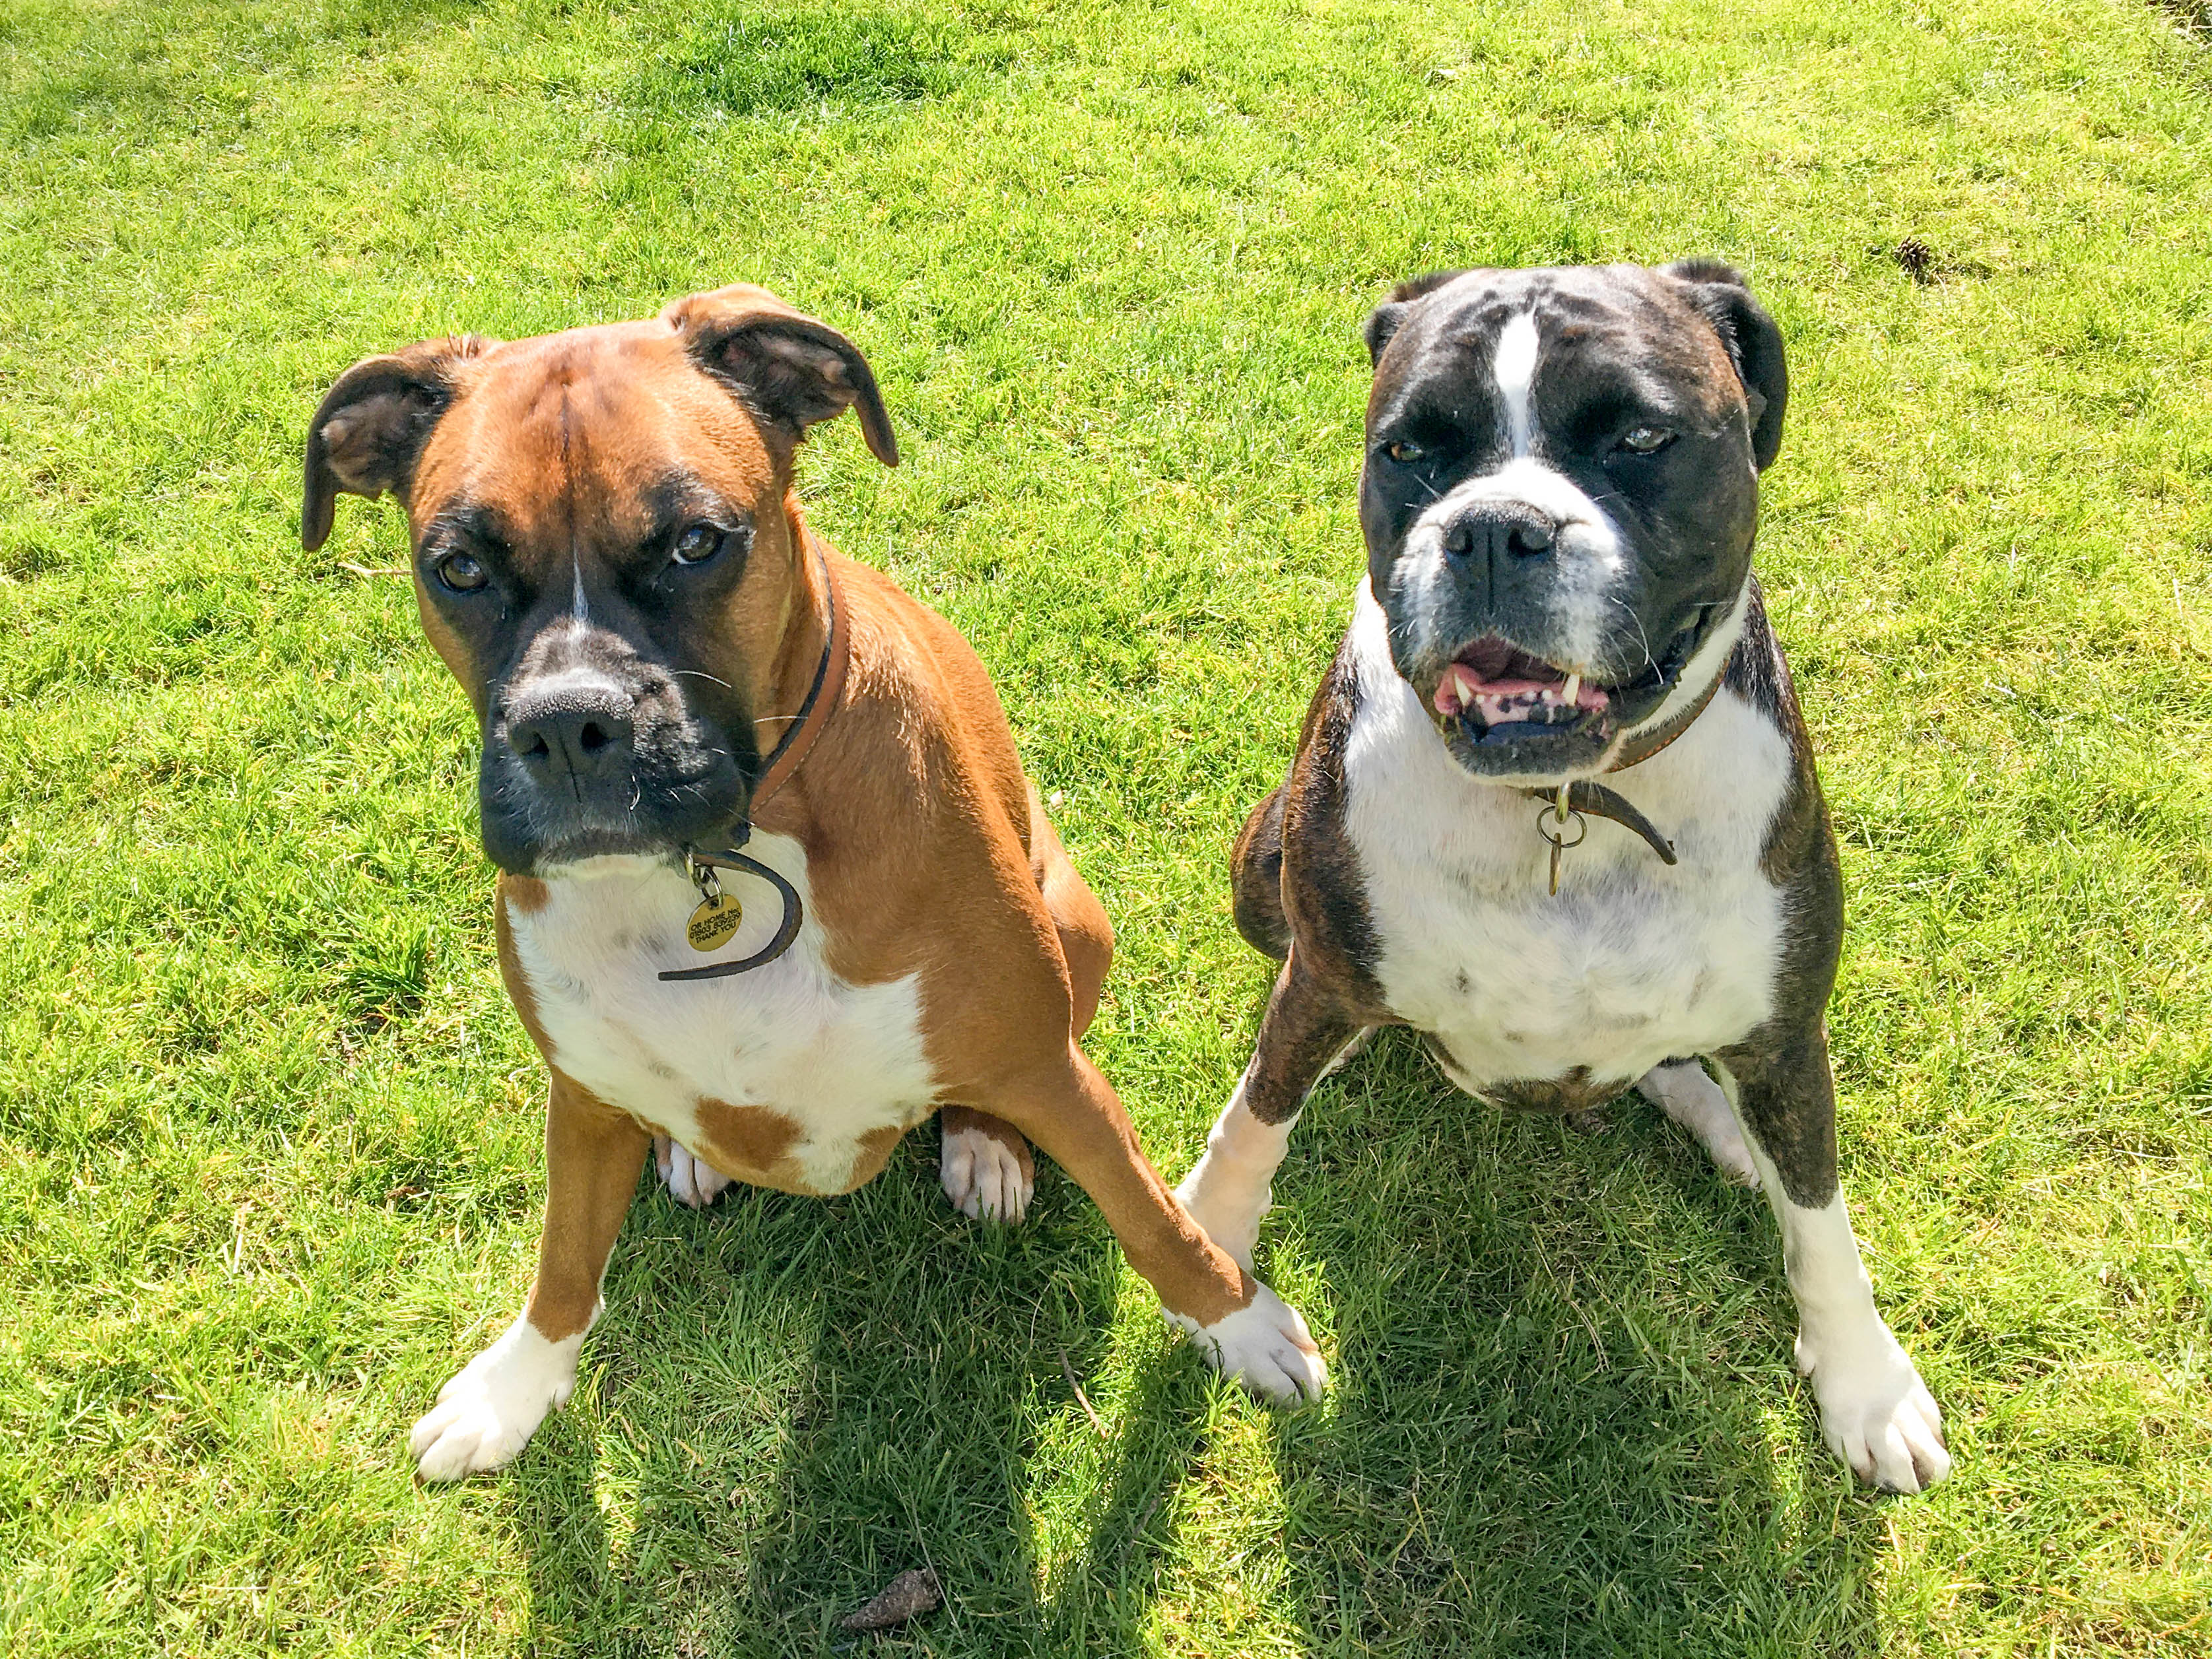 Lola and Bella are back to their normal selves after treatment for CRGV